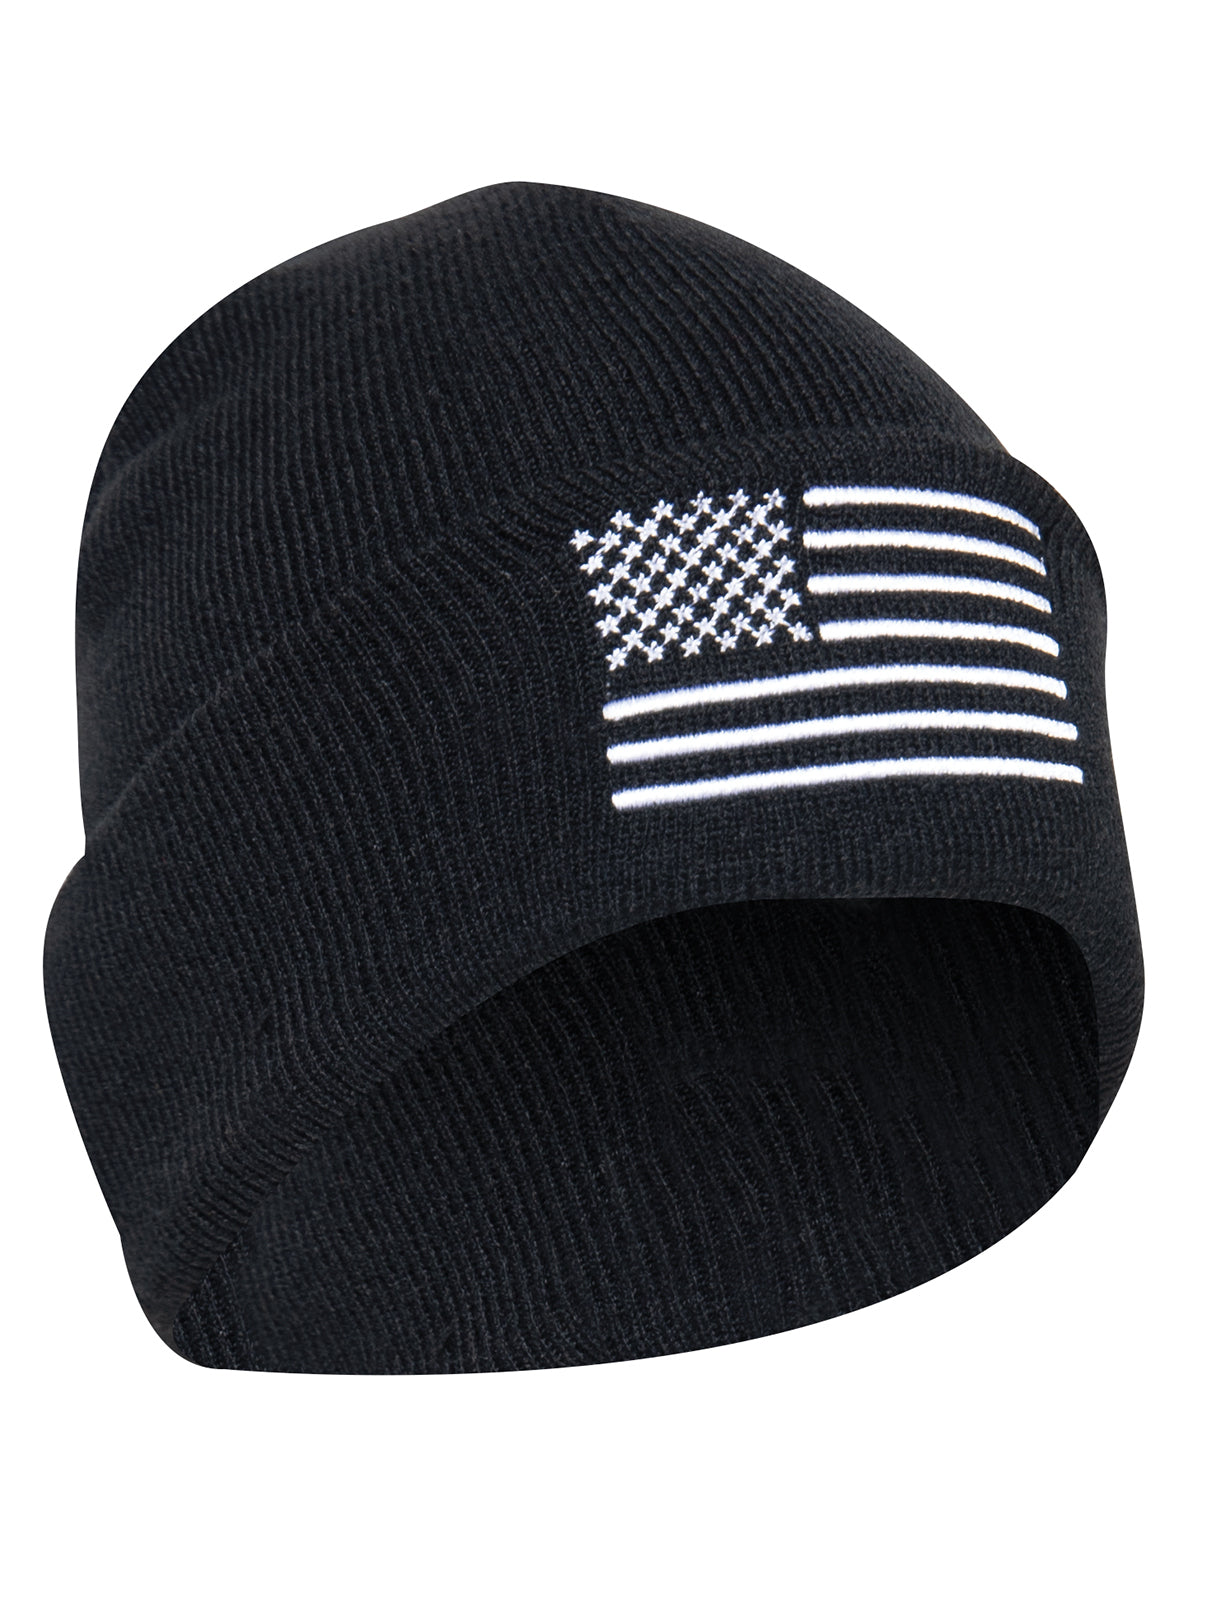 Men's US Flag Embroidered Fine Knit 100% Acrylic Watch Cap